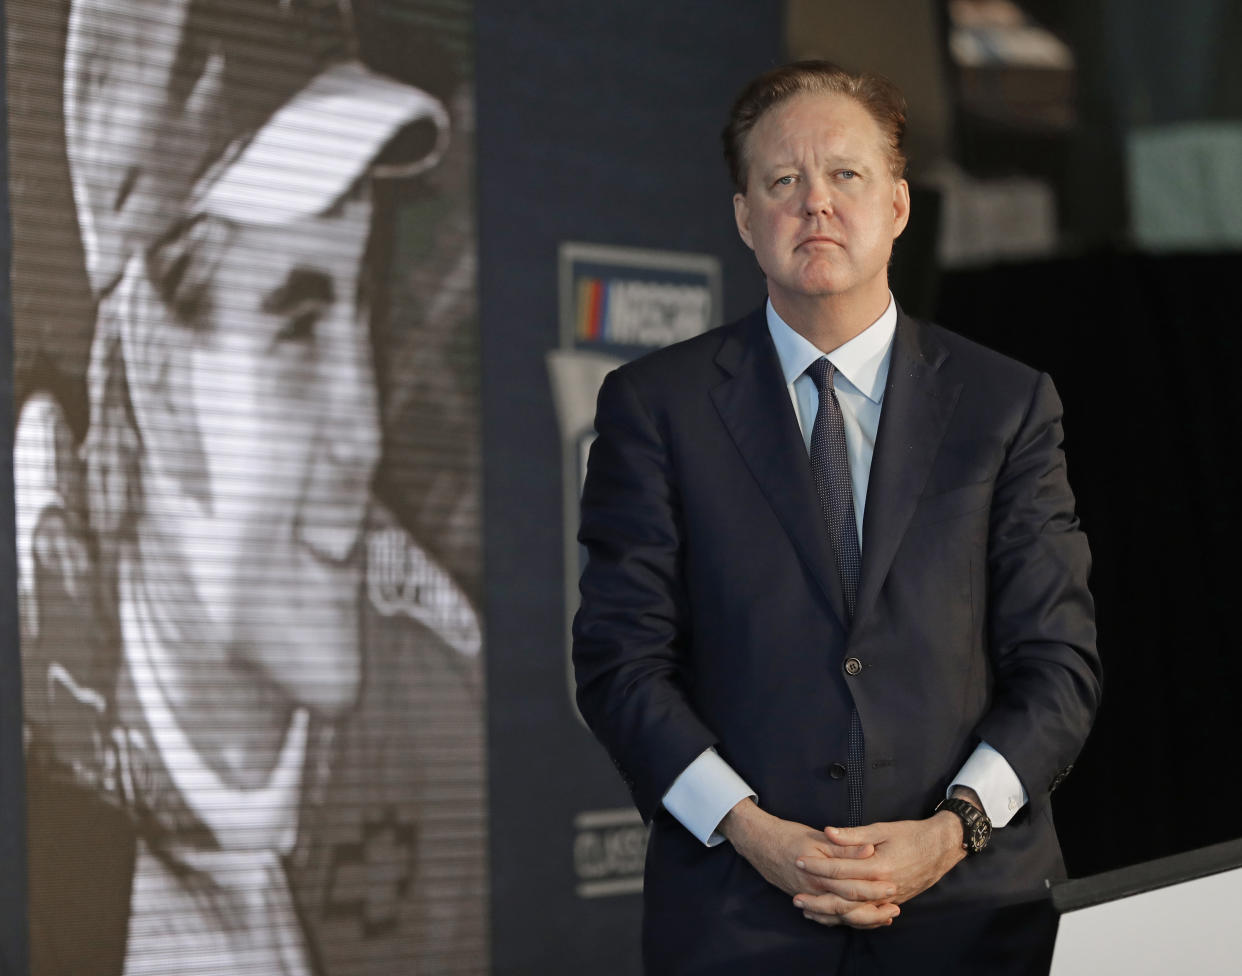 NASCAR Chairman Brian France watches a video of driver Jeff Gordon after after announcing Gordon will be inducted into the 2019 class of the NASCAR Hall of Fame, in Charlotte, N.C., Wednesday, May 23, 2018. (AP Photo/Chuck Burton)